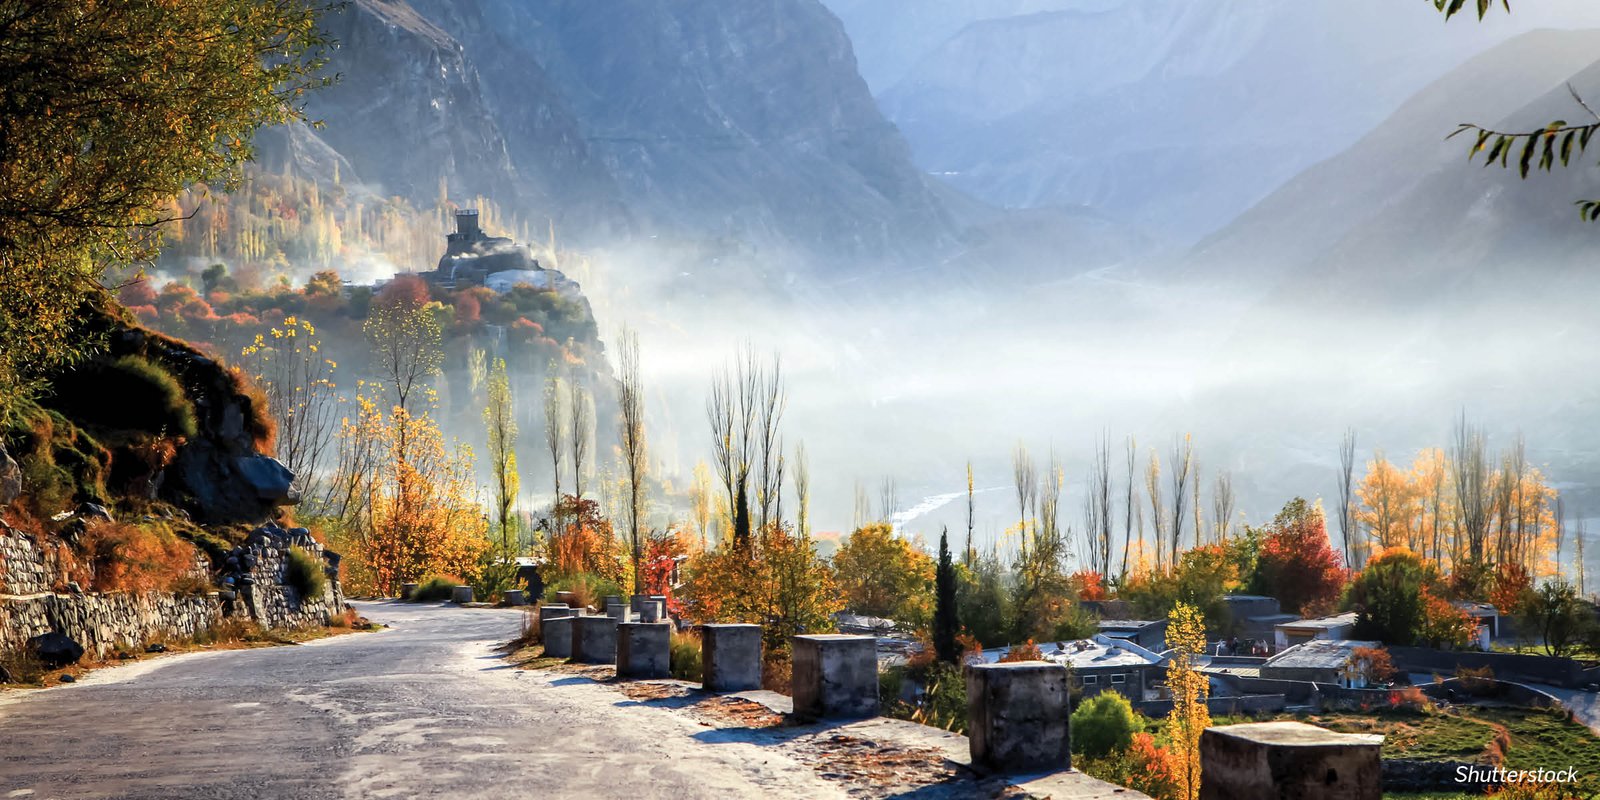 Hunza Valley is a spectacular valley situated in the Gilgit-Baltistan region of Pakistan. Nestled in the Karakoram mountain range,